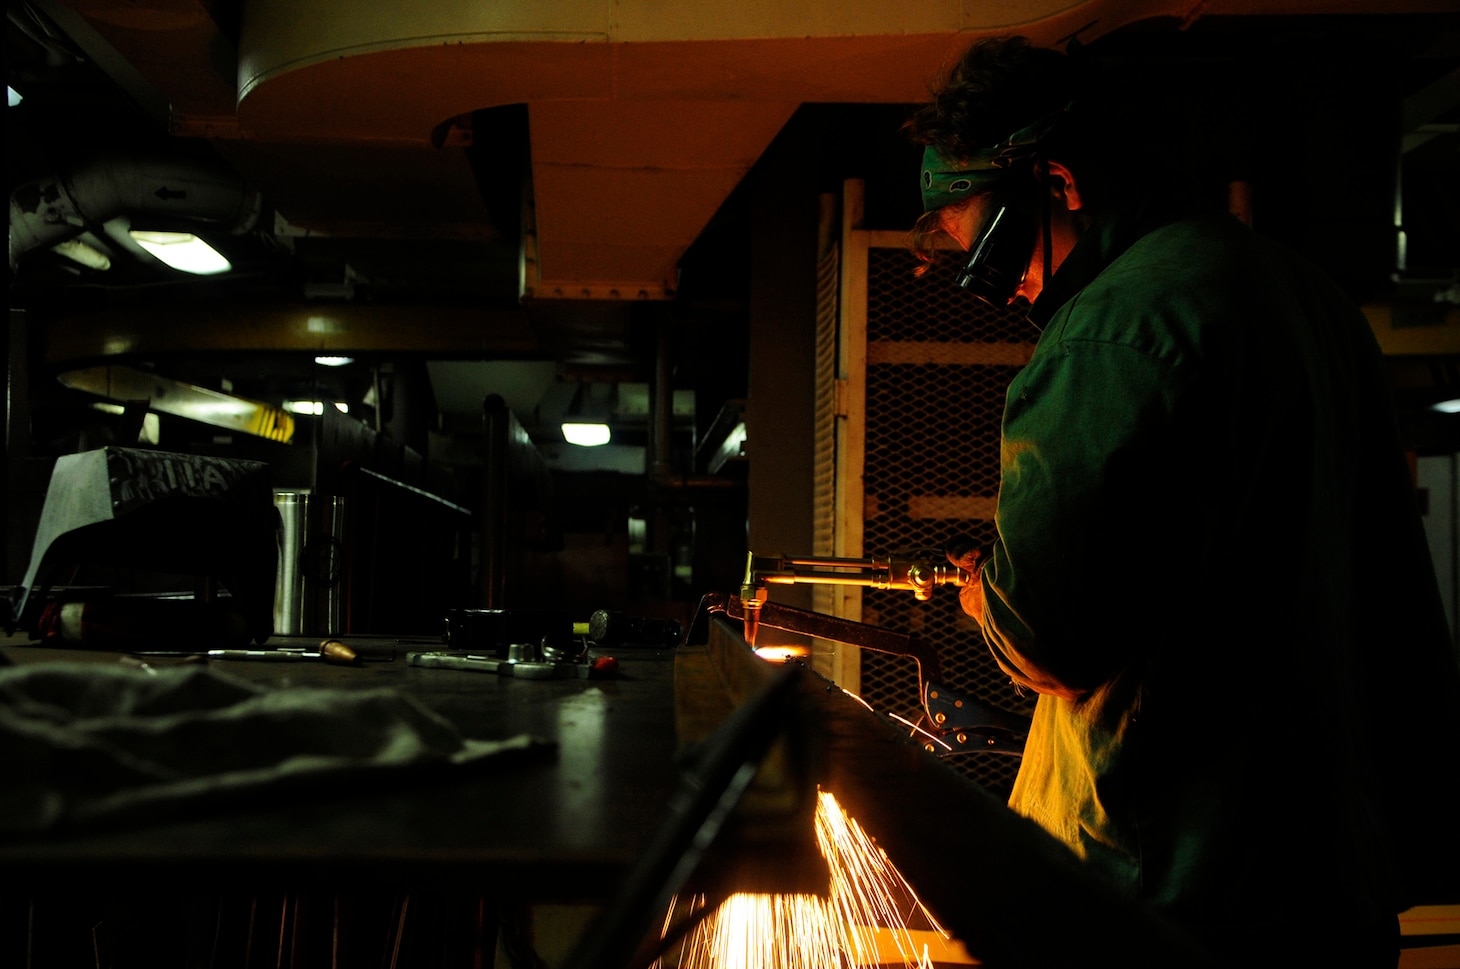 160112-N-PN275-019 DIEGO GARCIA, British Indian Ocean Territory (Jan. 12, 2016) Hull Technician Fireman Thomas Barnett, from USS Emory S. Land (AS 39) weld shop, cuts metal for a navigation chair for guided-missile submarine USS Florida (SSGN 728). Emory S. Land is a forward deployed expeditionary submarine tender on an extended deployment conducting coordinated tended moorings and afloat maintenance in the U.S. 5th and 7th Fleet areas of operations. (U.S. Navy photo by Mass Communication Specialist 3rd Class Zachary A. Kreitzer/Released)